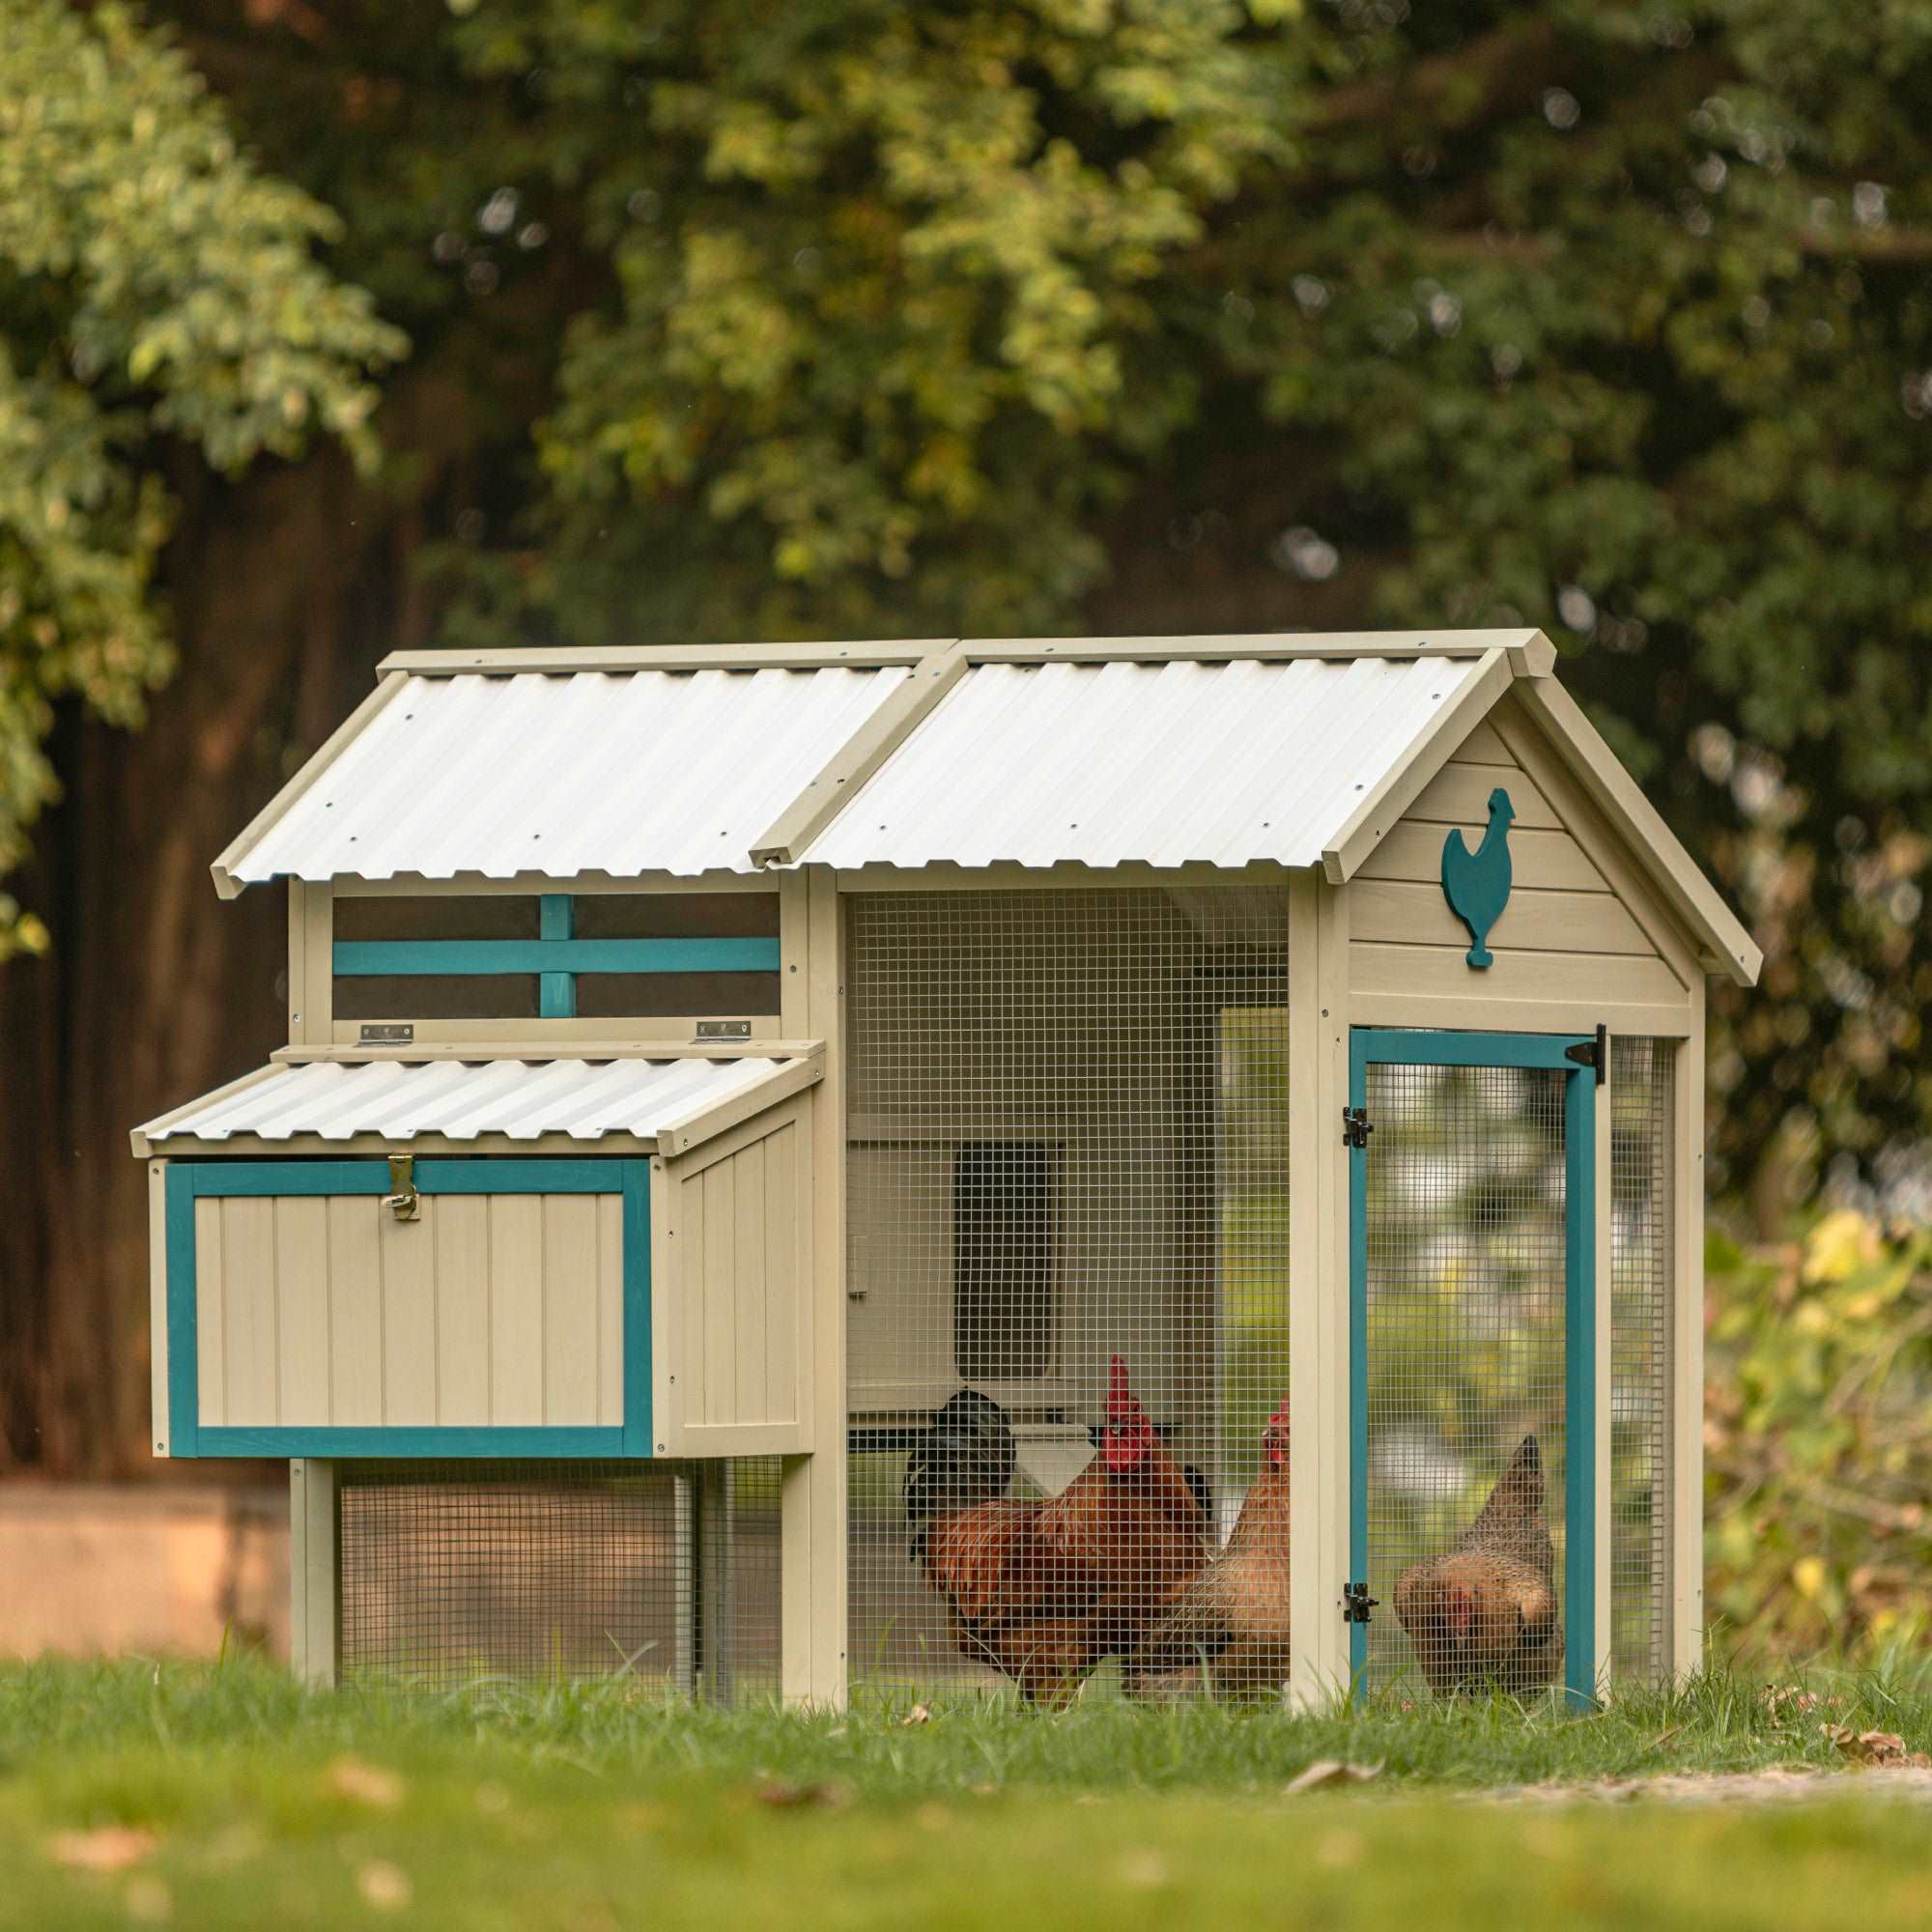 petsfit-waterproof-pvc-roof-chicken-coop-for-5-8-chickens-backyard-hen-house-with-easy-clean-pull-out-tray-integrated-nesting-boxes-for-outdoor-use-01